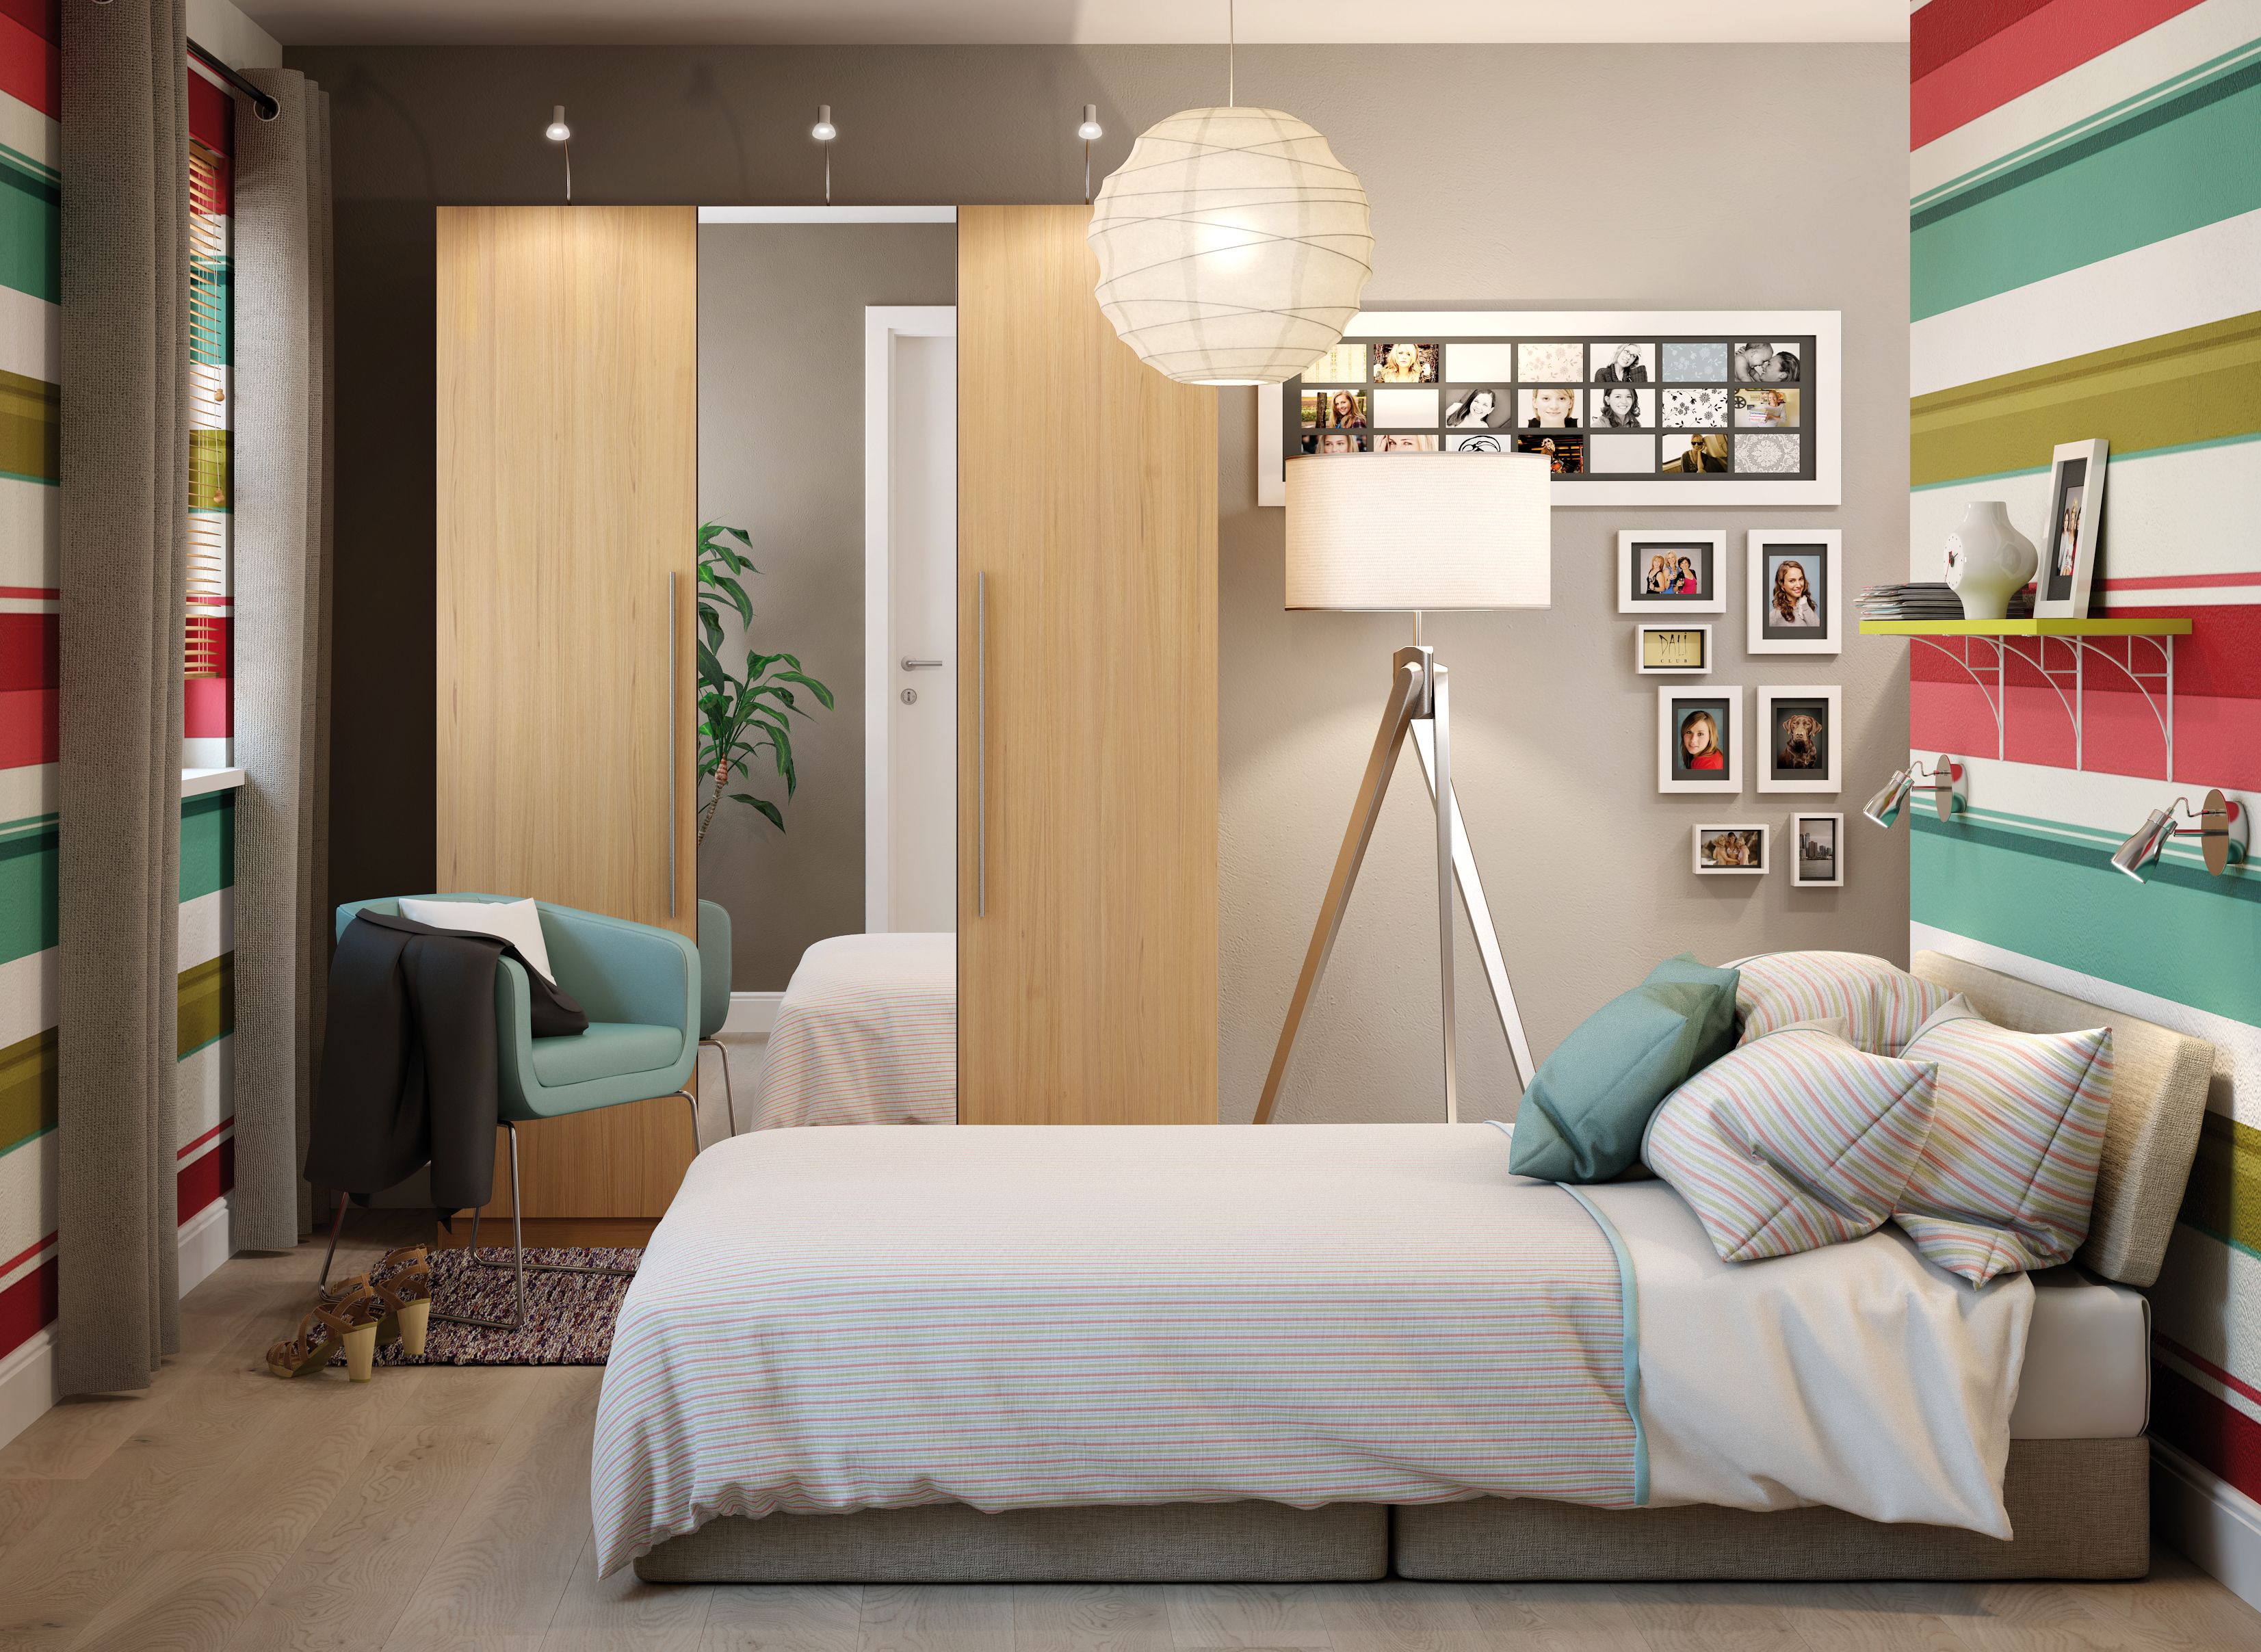 7 steps to planning a new bedroom | Ideas &amp; Advice | DIY ...